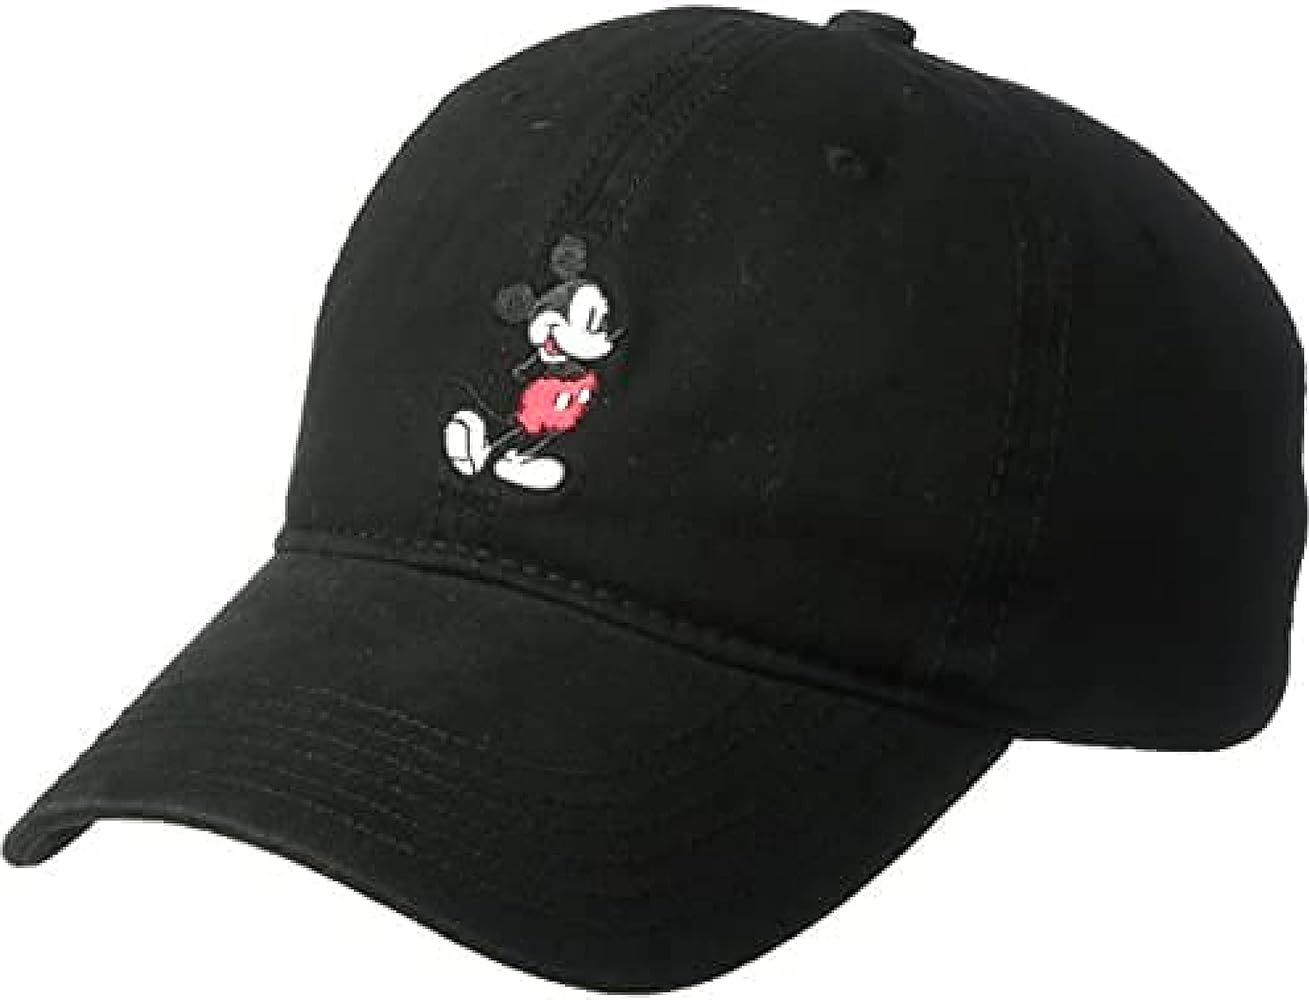 Concept One Disney Mickey Mouse Embroidered Cotton Adjustable Dad Hat with Curved Brim | Amazon (US)